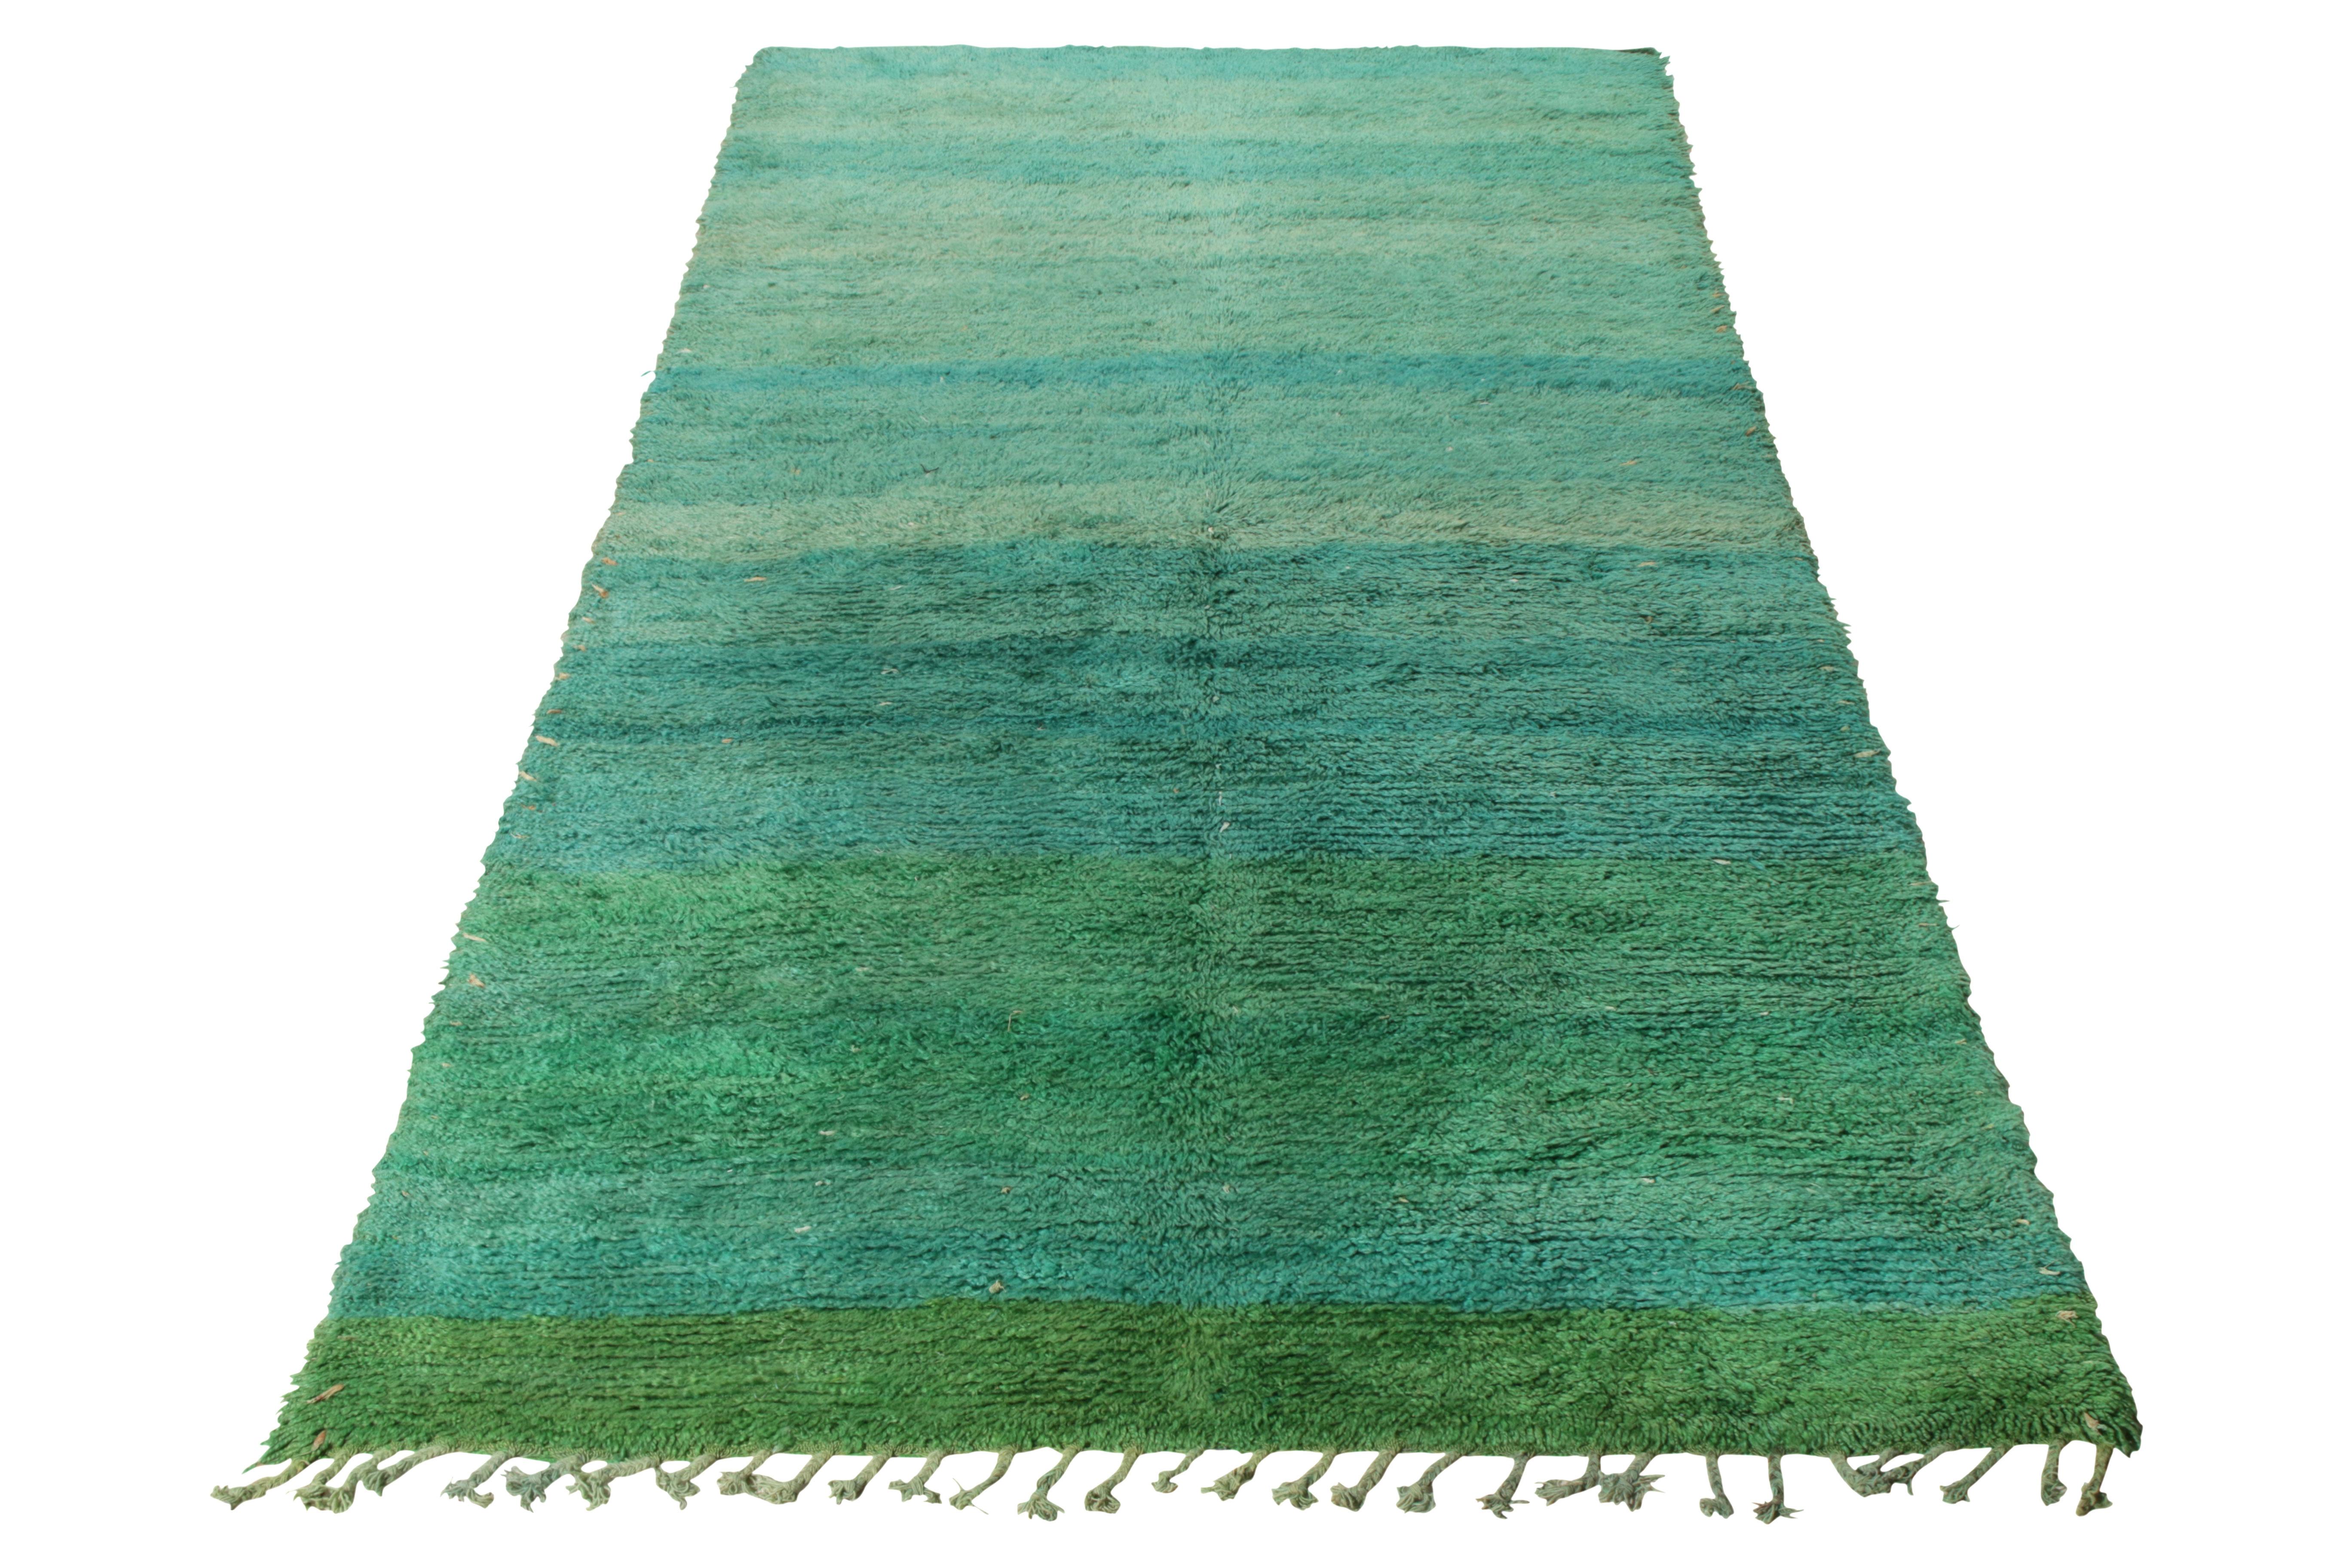 Hand-knotted in wool, a vintage Moroccan rug originating circa 1950-1960 joining Rug & Kilim’s titular collection. 

A Berber tribal carpet, the rug enjoys one-sided fringes on the lower border and a striation of colors emphasizing a fabulous